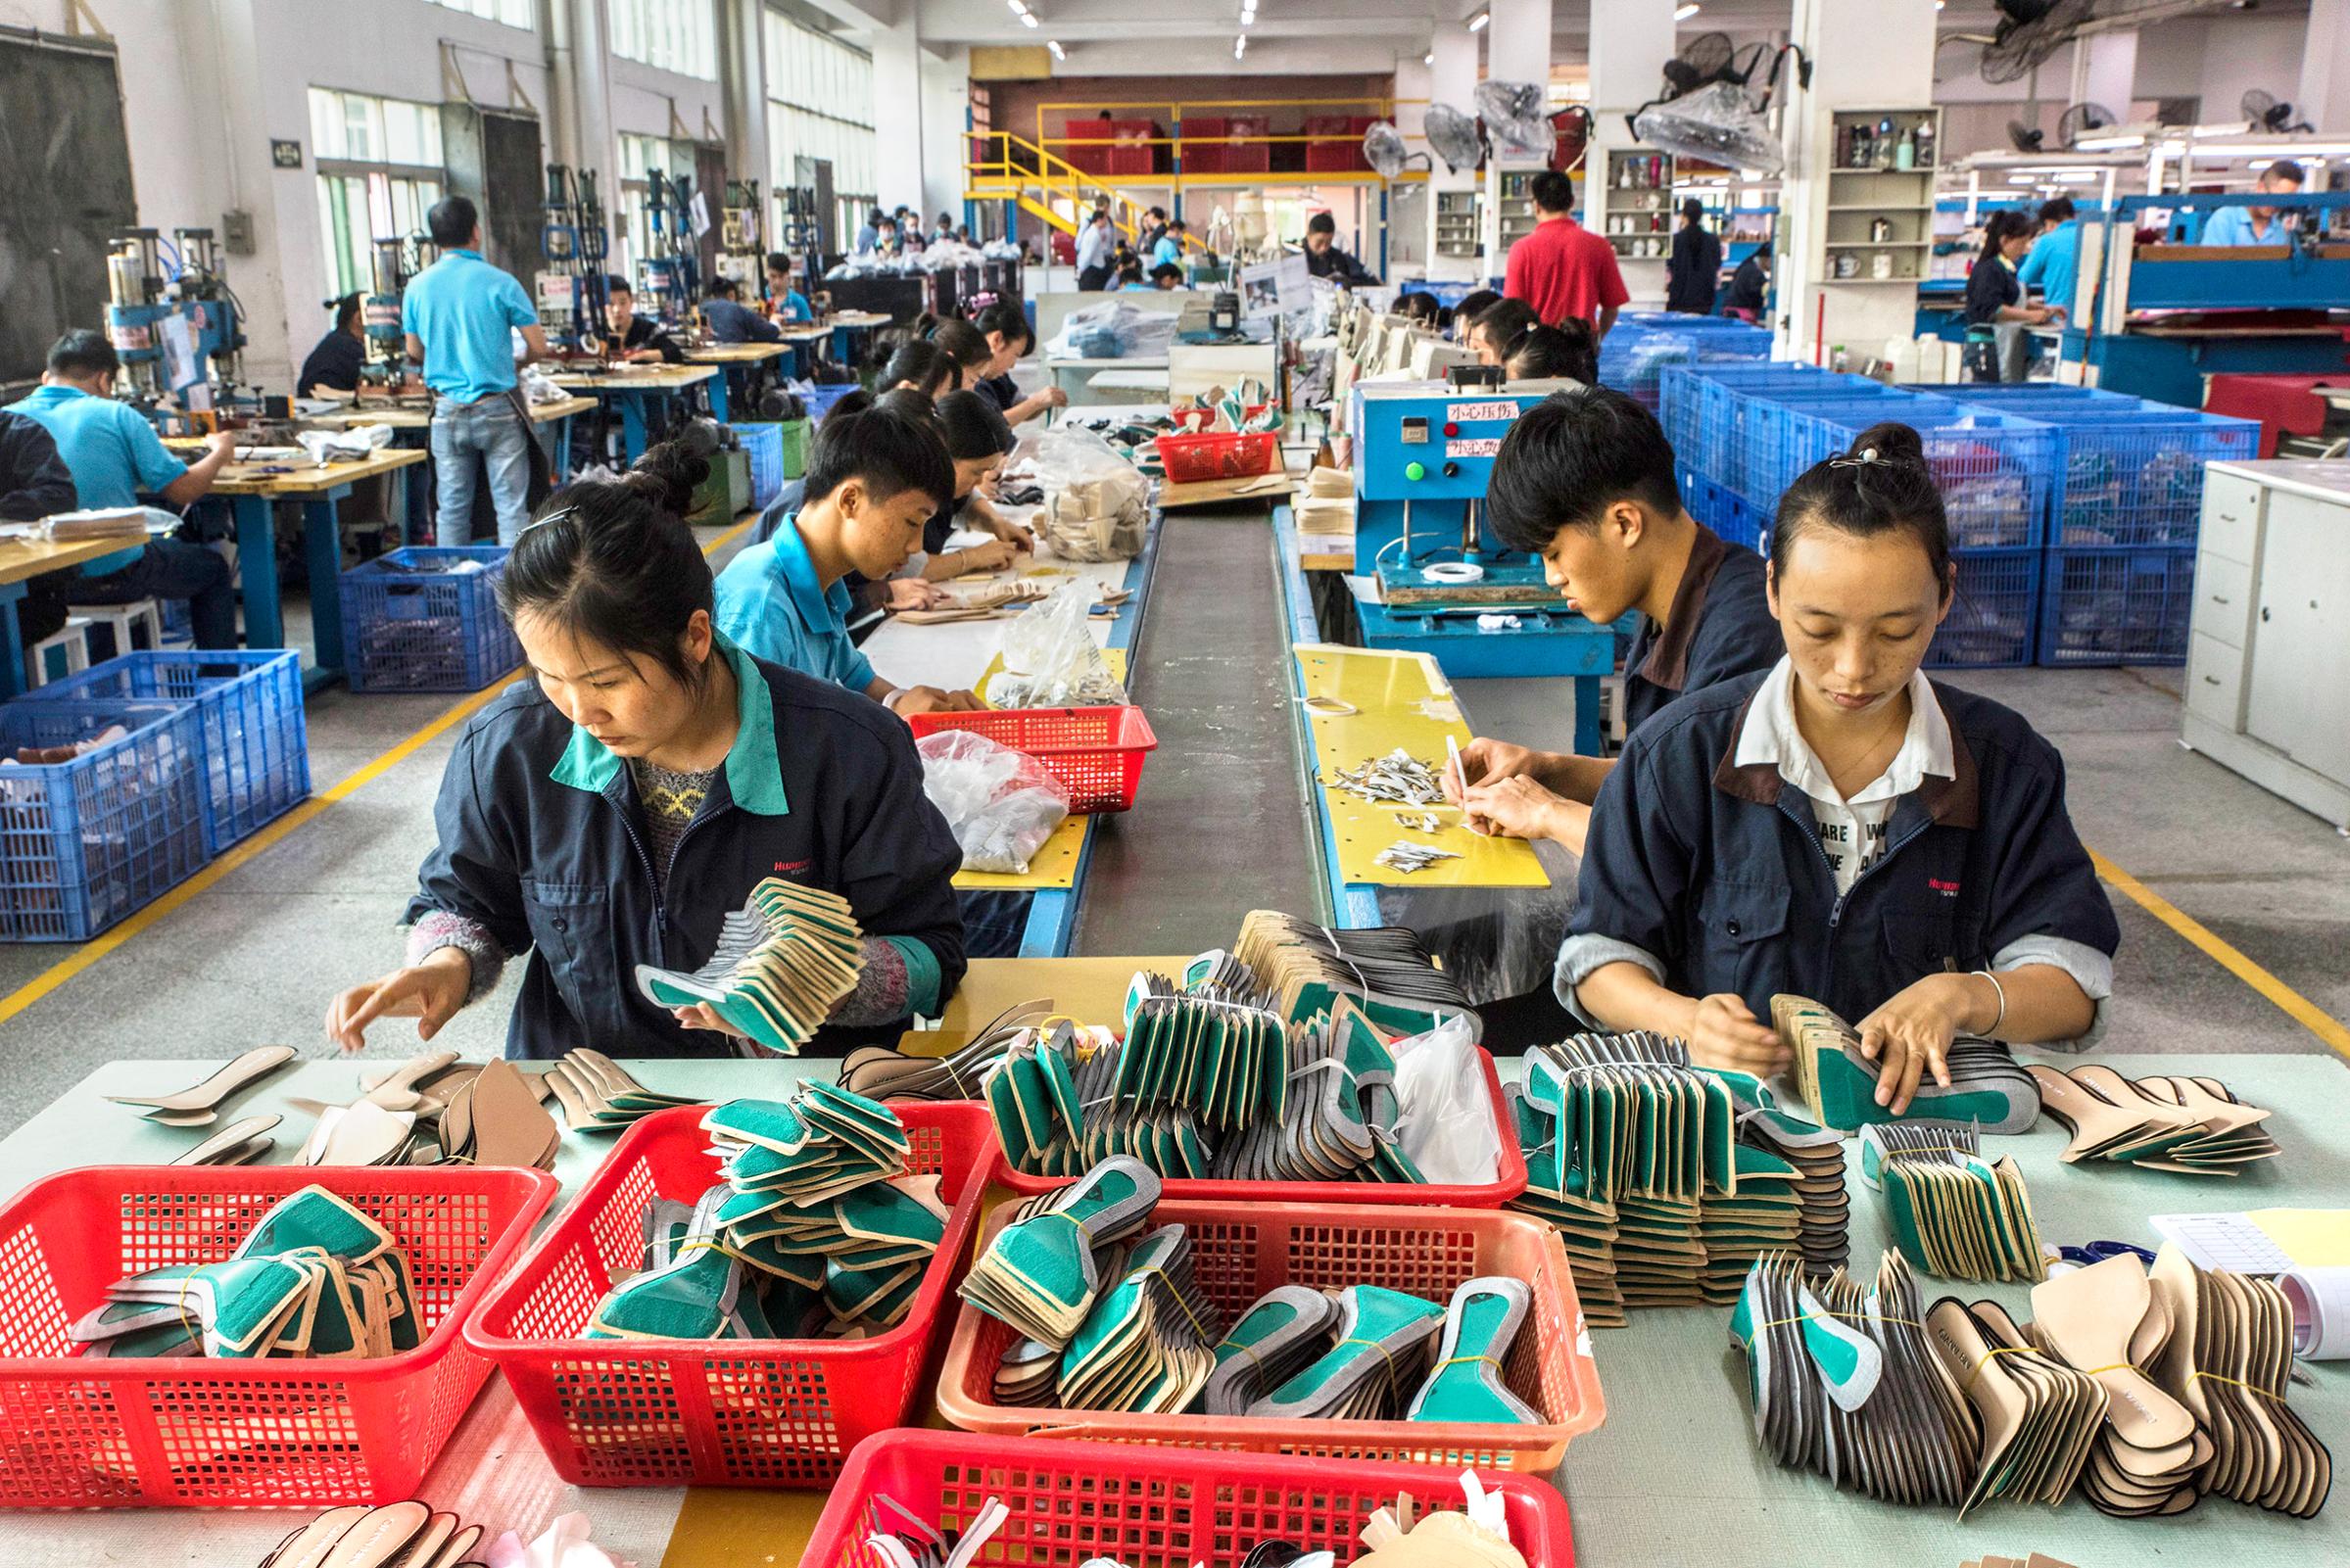 Workers on an assembly line at a Huajian International shoe factory, which makes shoes for Ivanka Trump and other designers, in Dongguan, China.